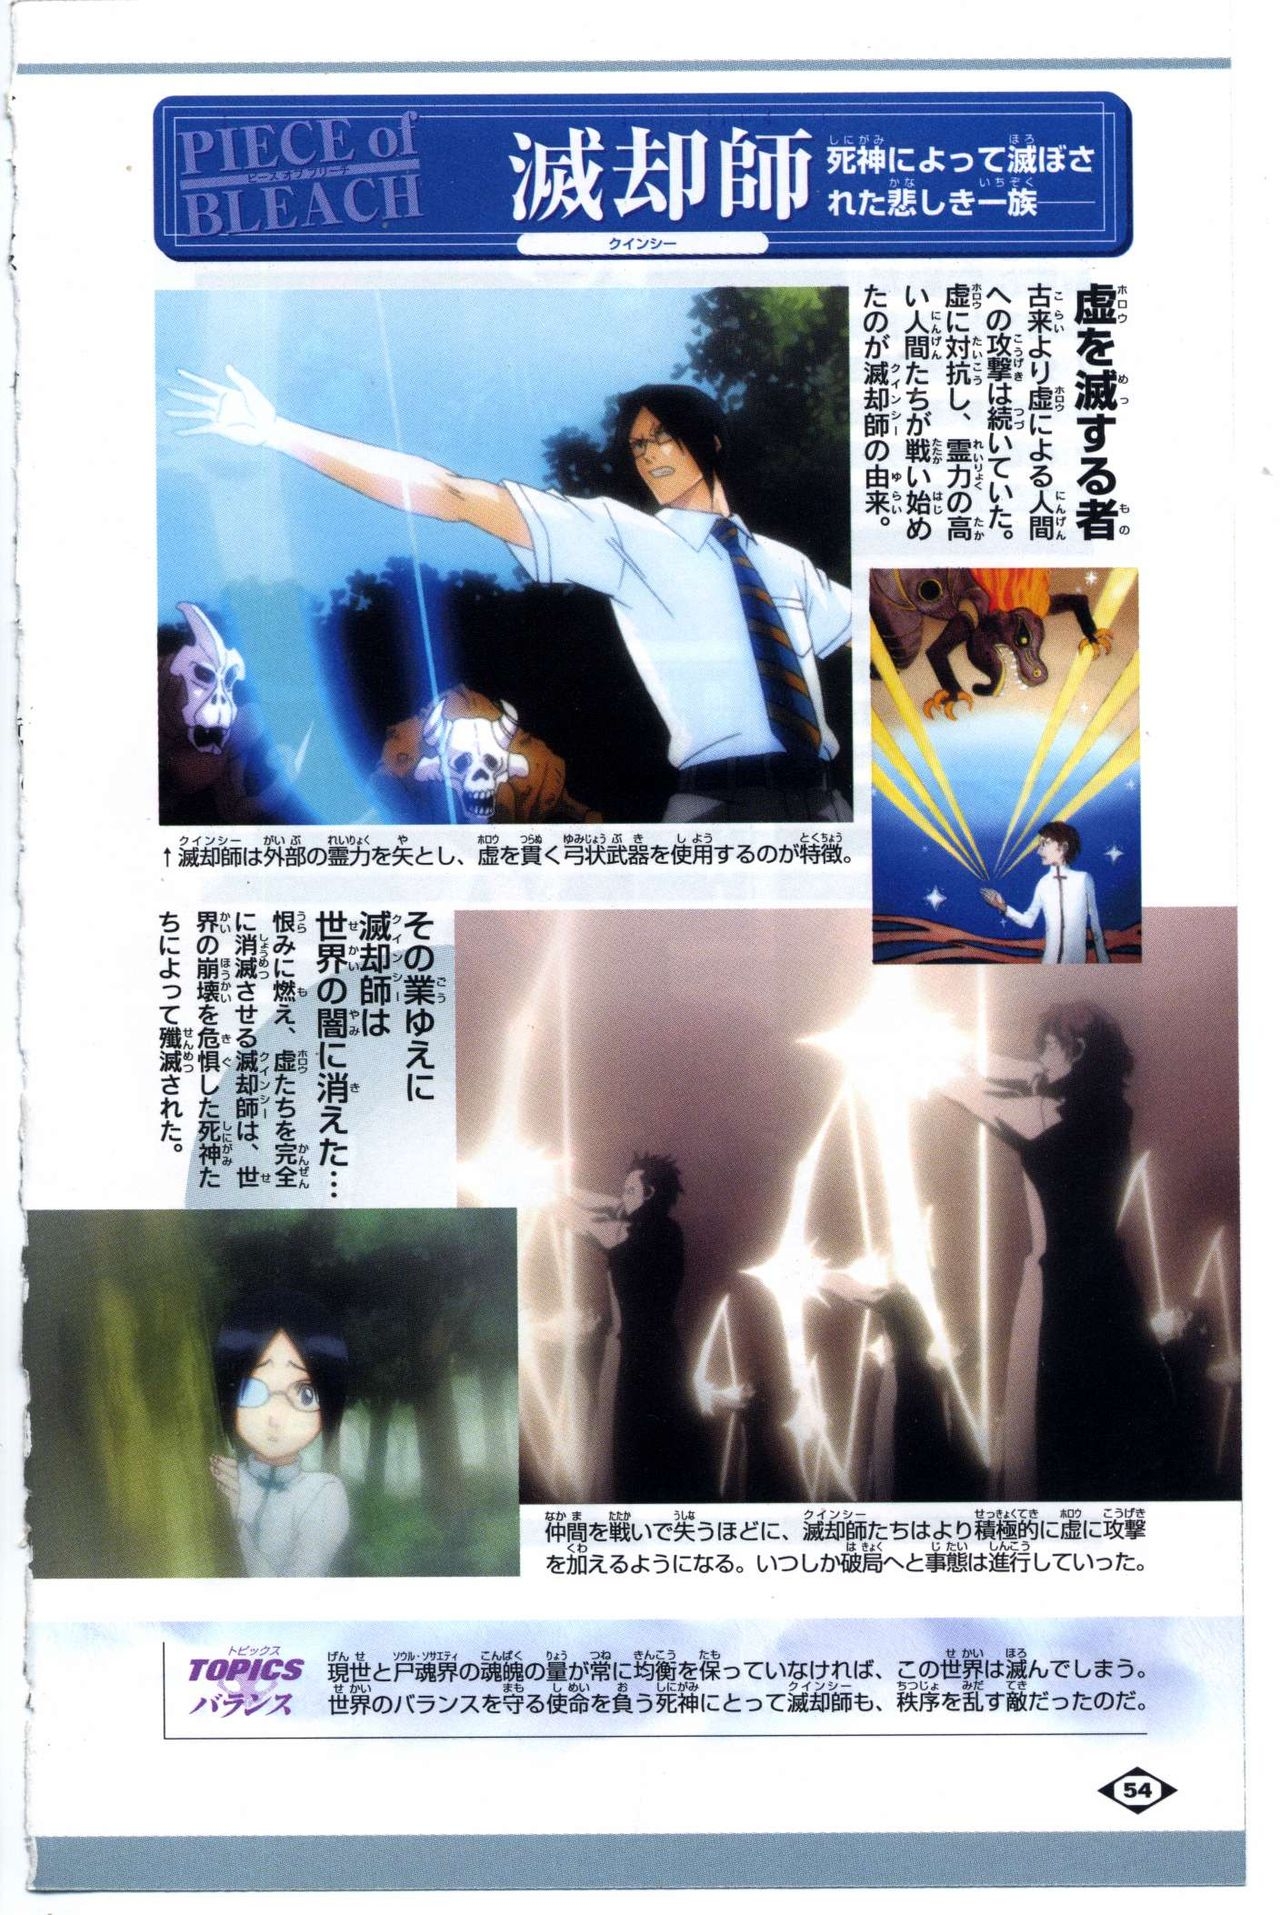 Bleach: Official Animation Book VIBEs 54